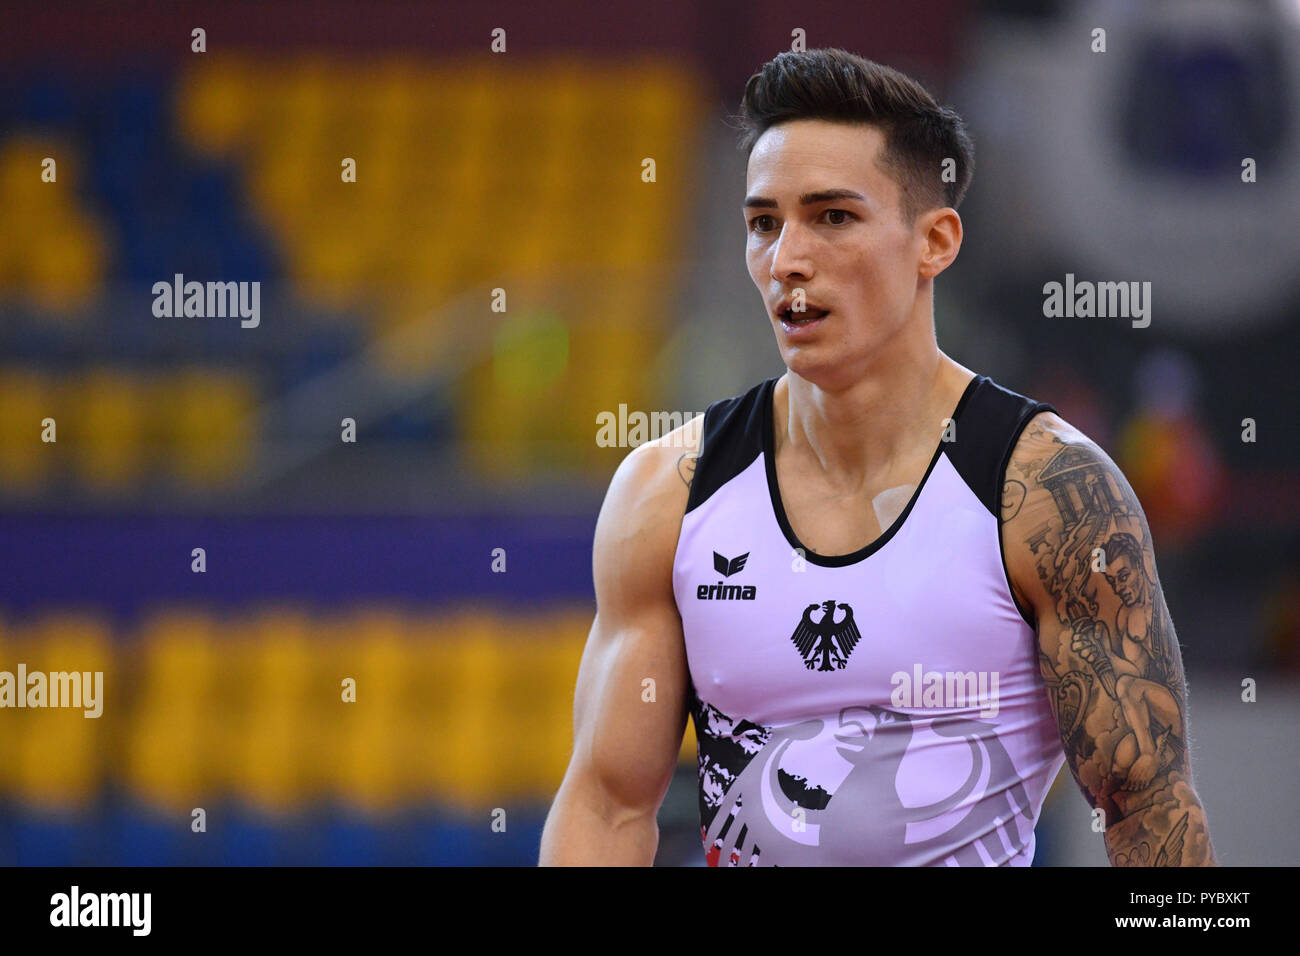 Marcel Nguyen (GER),  October 26, 2018 - Artistic Gymnastics : The 2018 Artistic Gymnastics World Championships, Men's team Qualification Floor at Aspire Dome in Doha, Qatar. (Photo by MATSUO.K/AFLO SPORT) Stock Photo